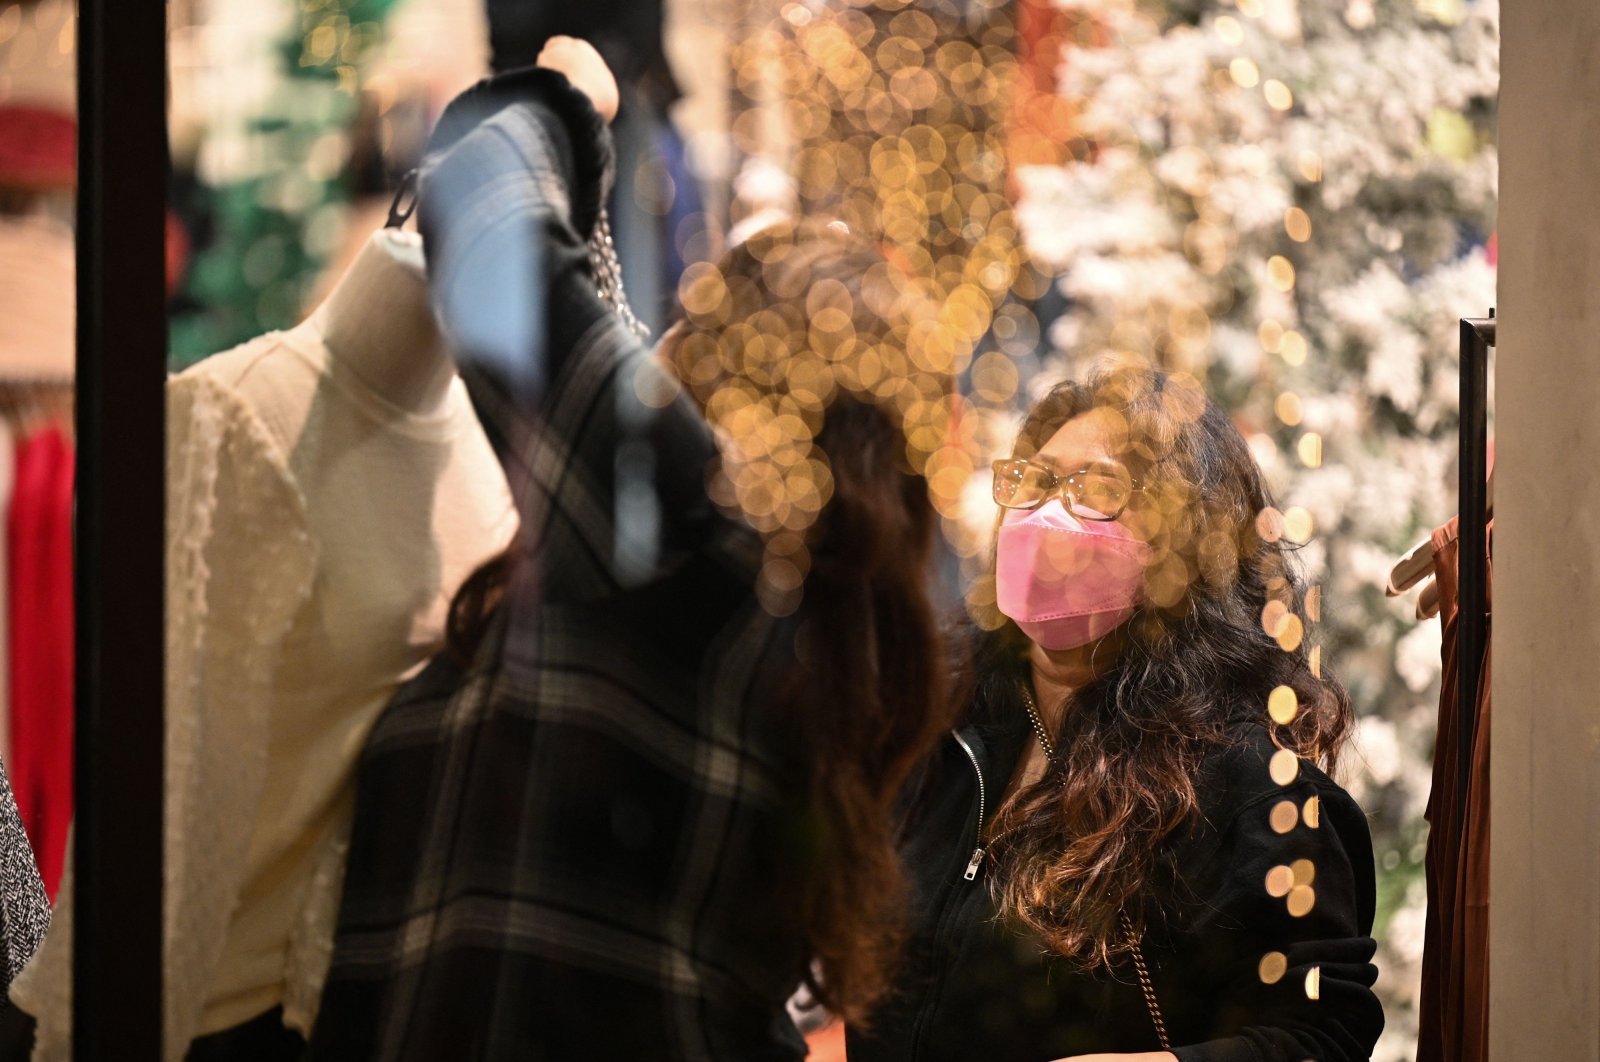 Shop attendants wearing protective face masks adjust the holiday display in the window of a women&#039;s clothing store in Glendale, California, Dec. 1, 2021. (AFP Photo)